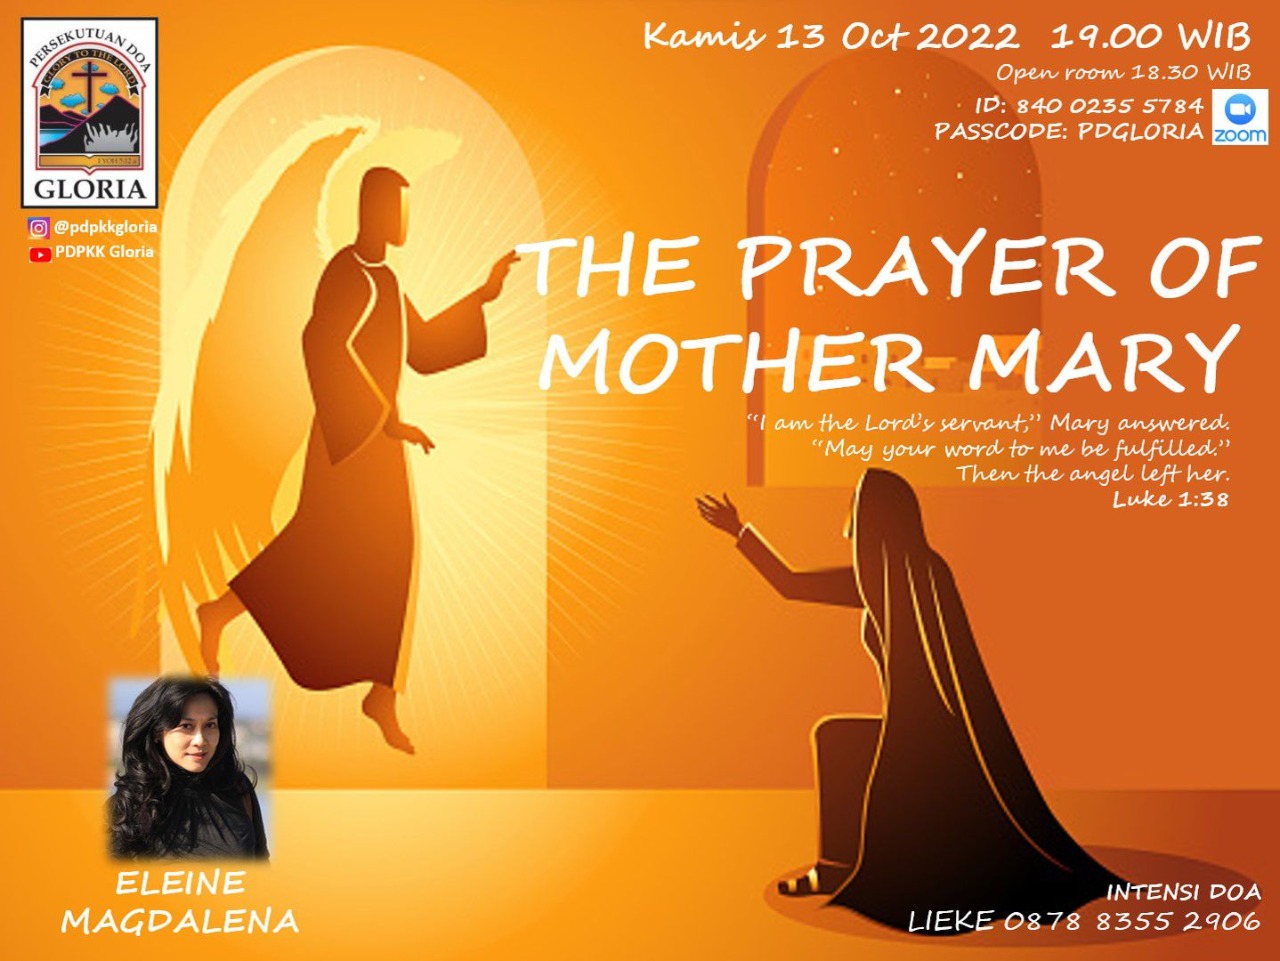 THE PRAYER OF MOTHER MARY